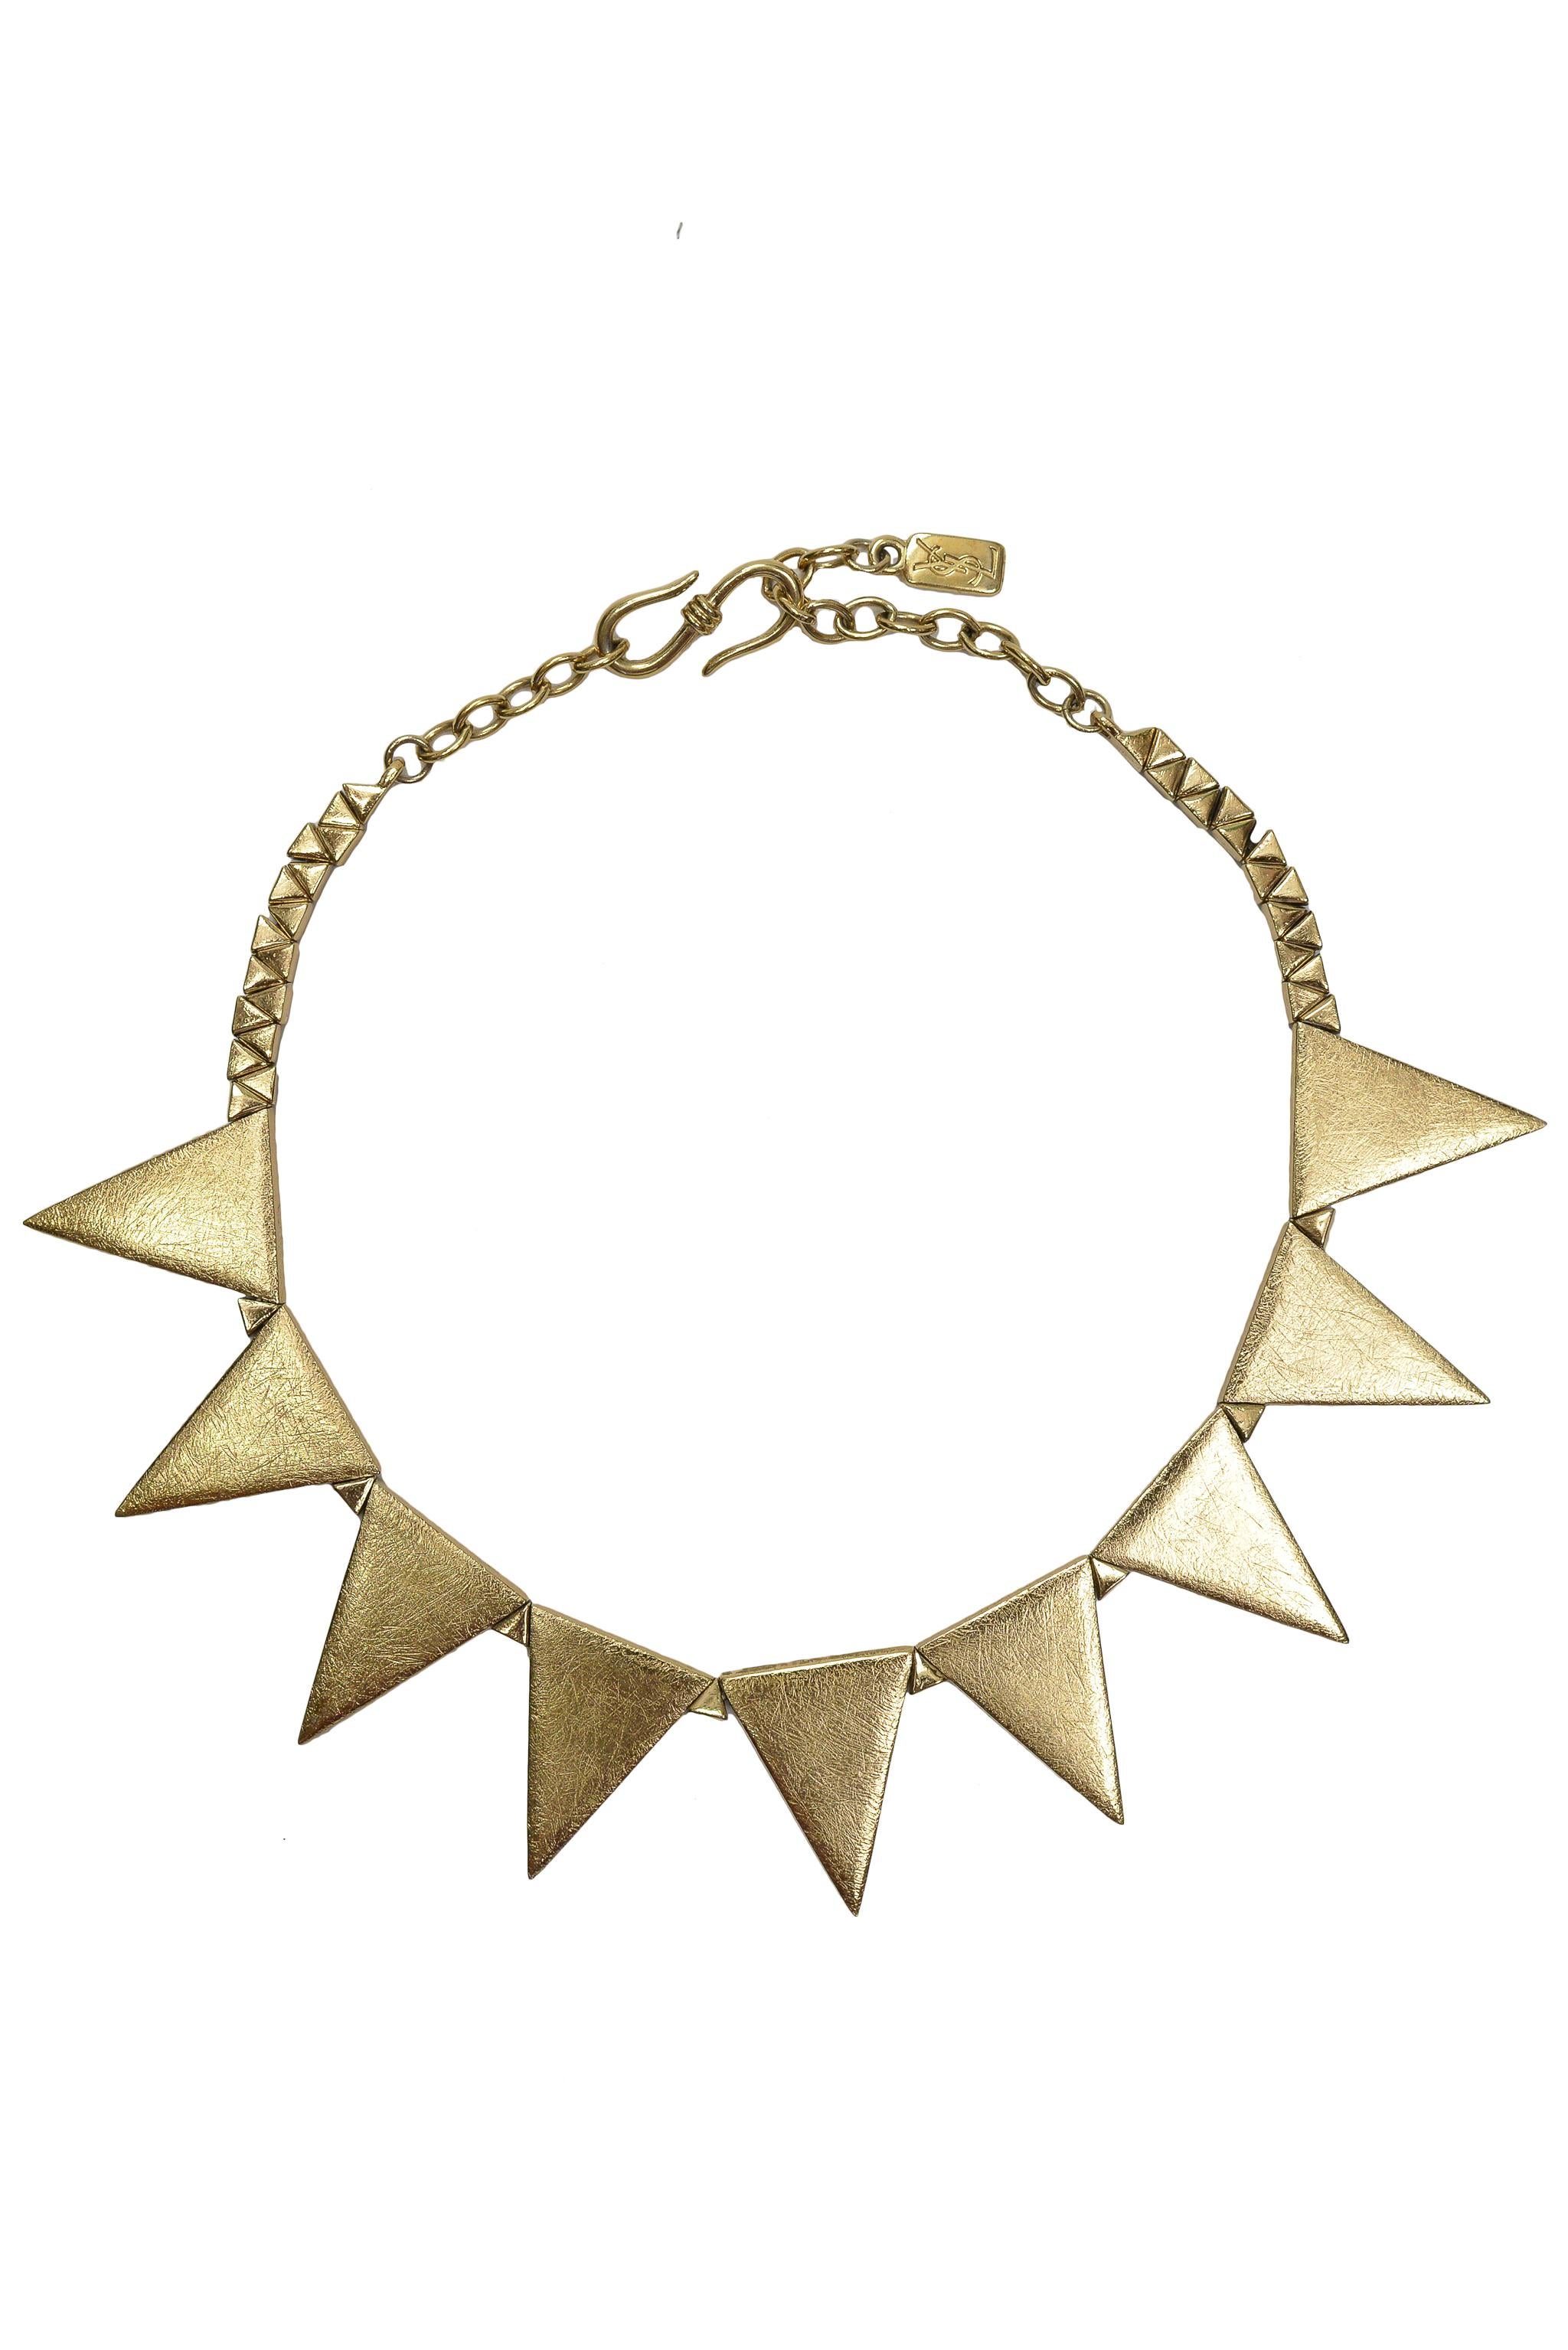 Resurrection Vintage is excited to present a vintage Yves Saint Laurent YSL gold-tone spike necklace that features an adjustable link chain, and hook closure. Signed YSL.

Yves Saint Laurent
One Size
Metal
1980s
Signed YSL
Excellent Vintage